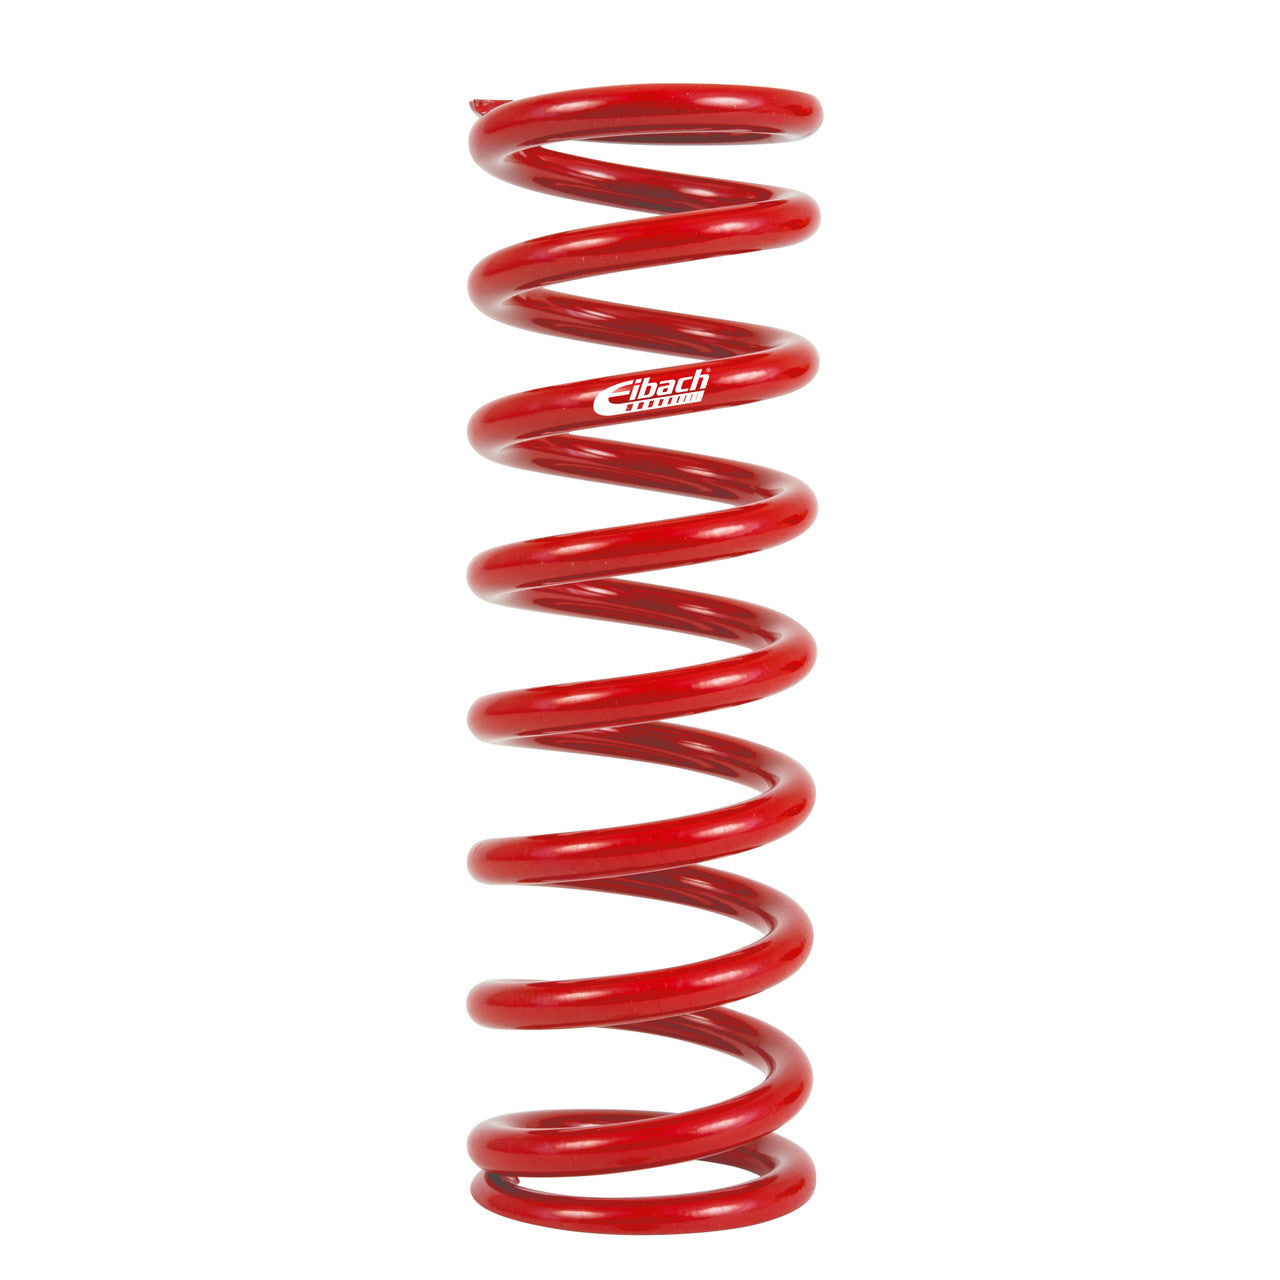 Eibach Metric Coilover Spring - 70MM I.D. 300-70-0055